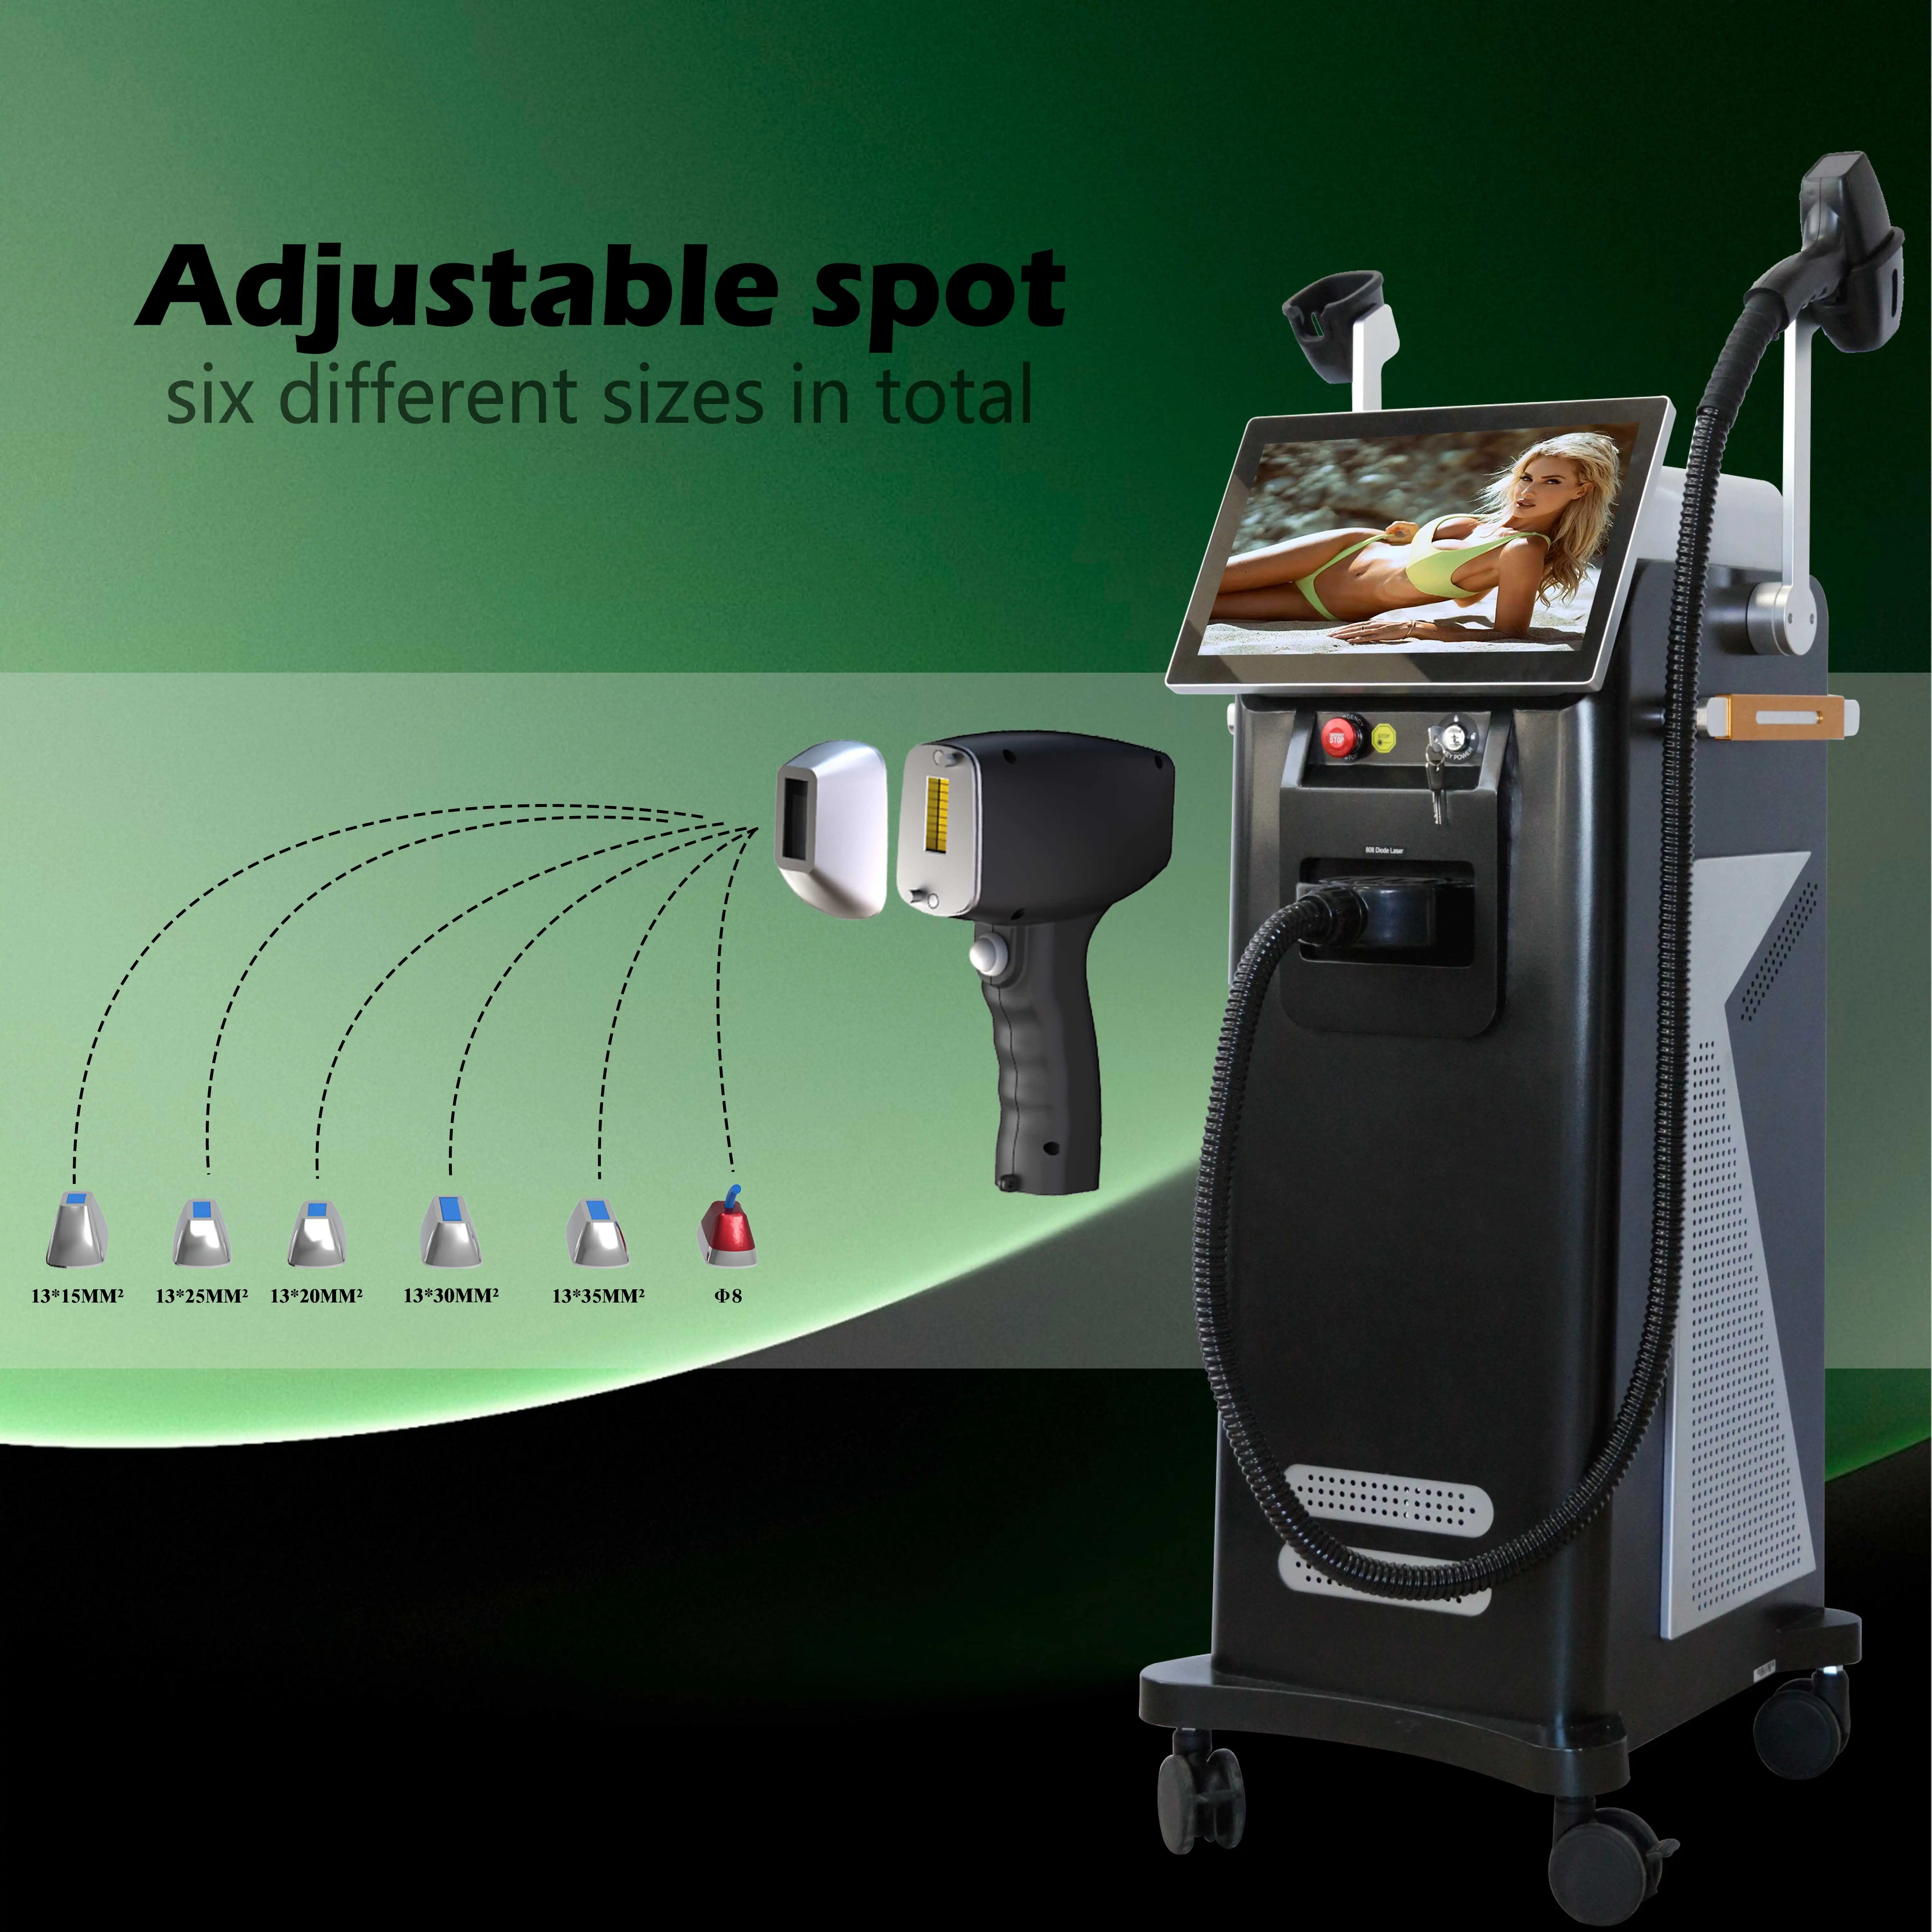 Ajustable laser heads Comfortable No Pain Spares Parts Big Screen New Upgrade 808 Hair Removal Diode Laser